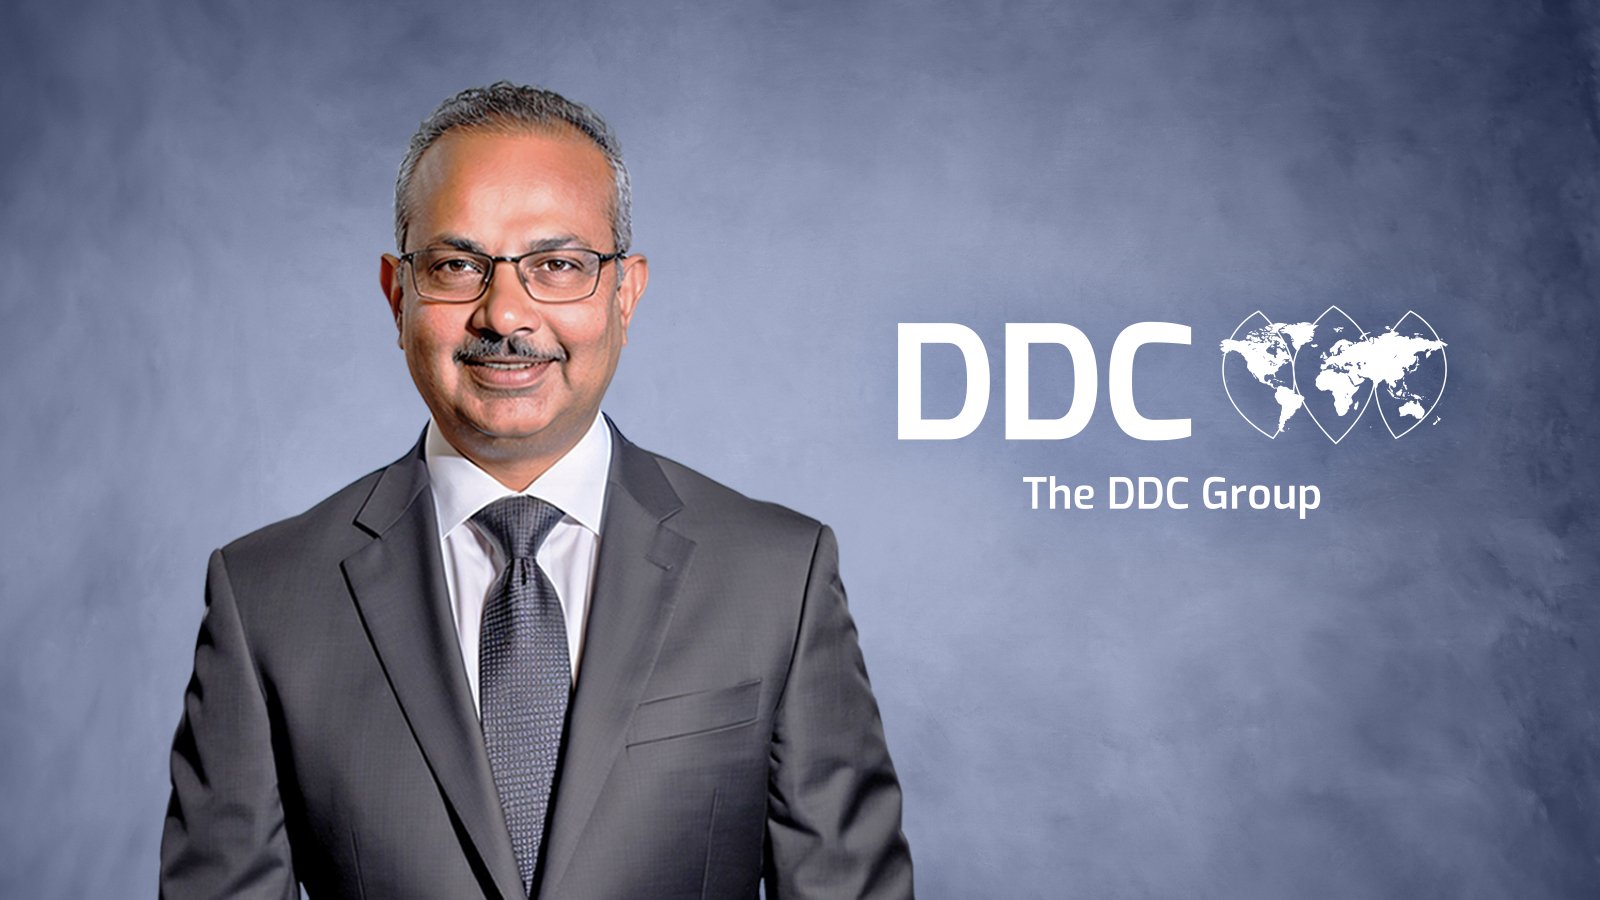 DDC FPO Parent Company Appoints New Group CEO, Nimesh Akhauri